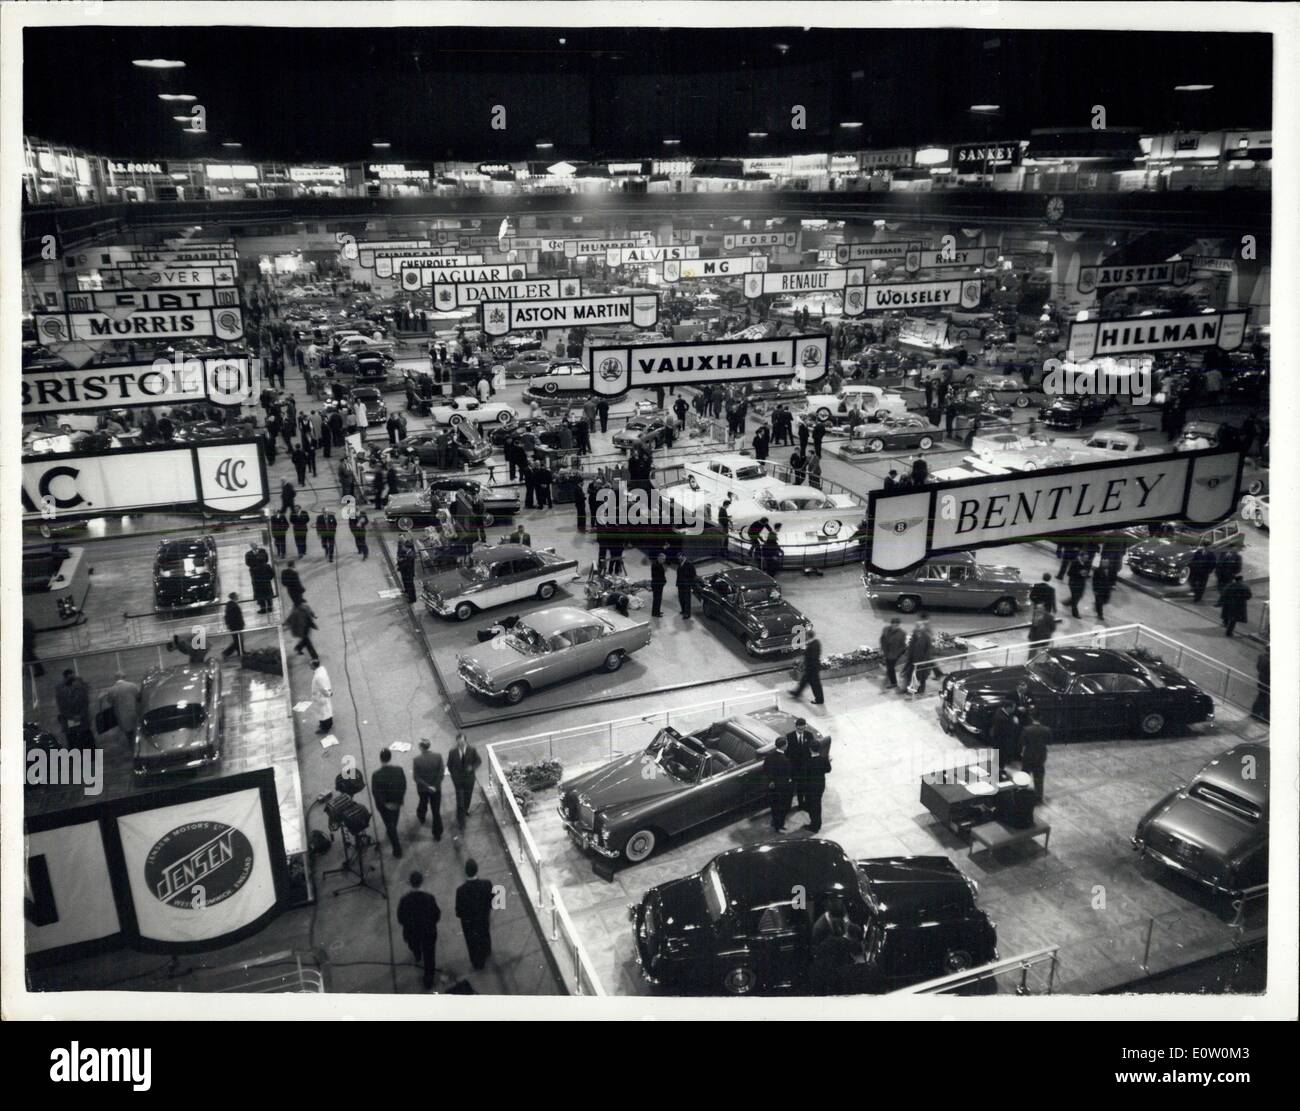 Oct. 16, 1960 - Preview of the Motor Show General View - A Preview was held today at Earle Court - of the Motor Show which opens there tomorrow - Keystone Photo Shows:- General View at the Show during the Preview today. Stock Photo